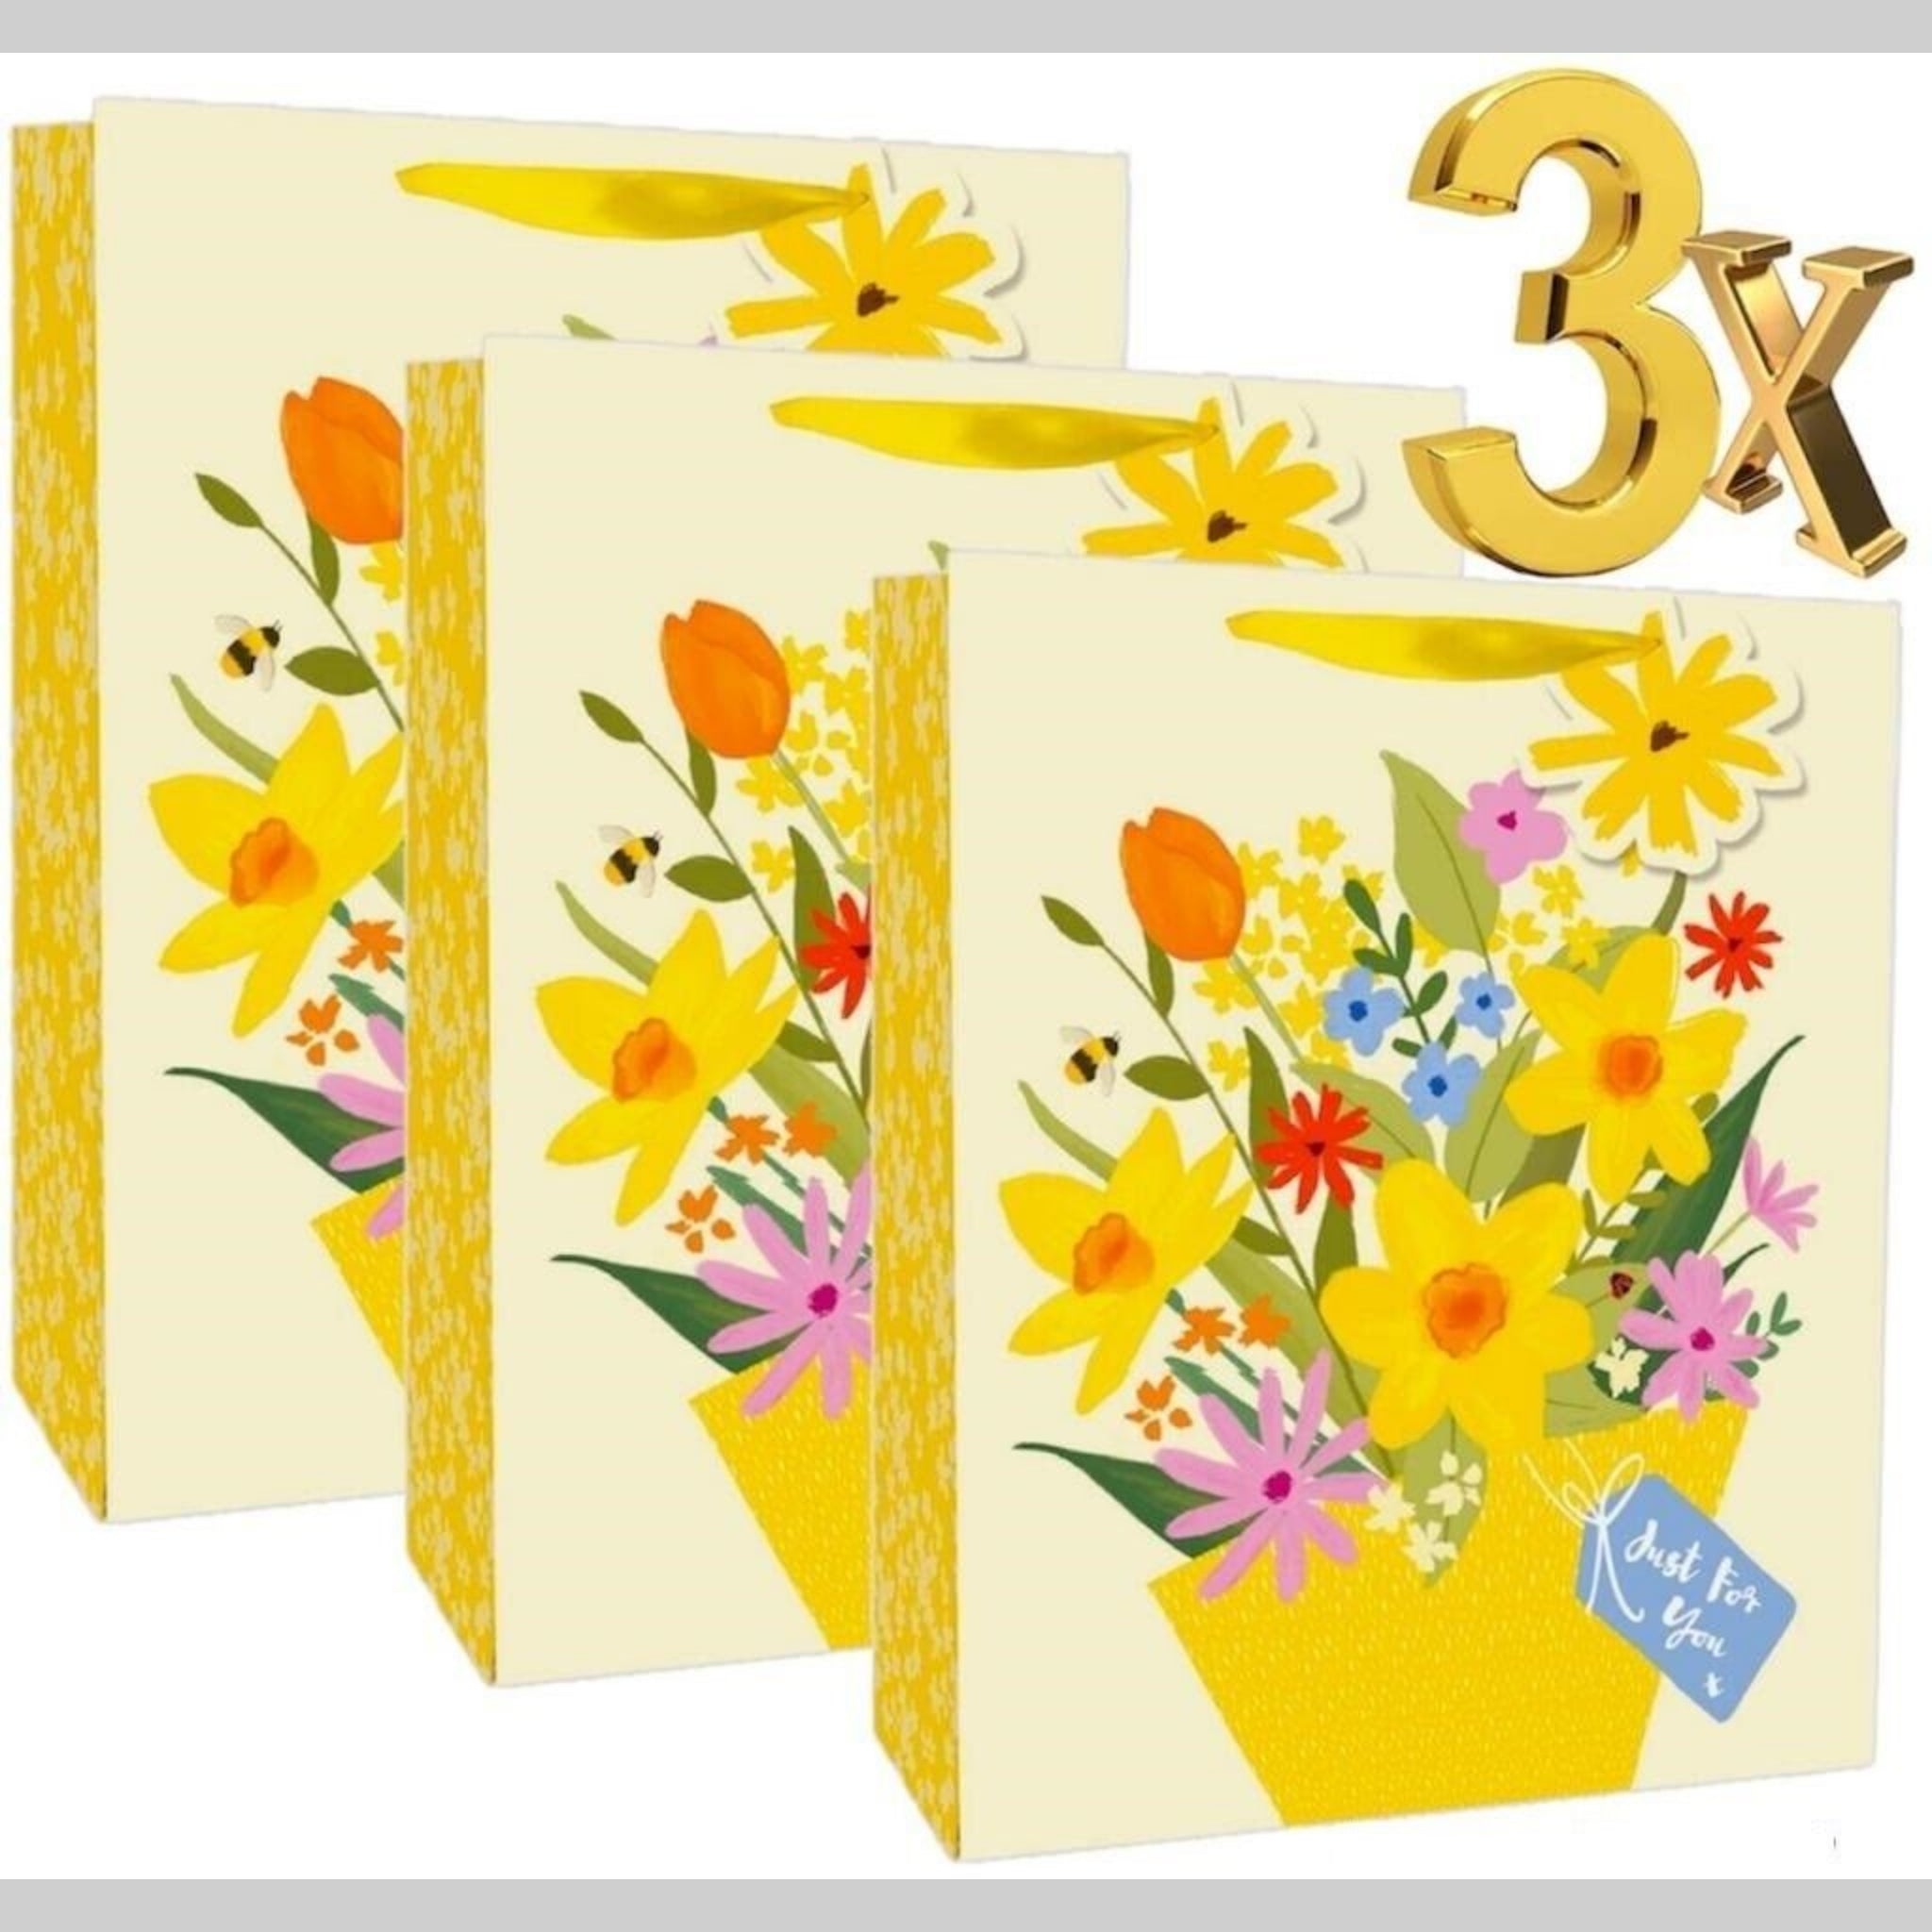 Beclen Harp 3x L/M Size Luxury Easter Traditional Flowers/Floral Print Present/Gift Bags With ''Just For You'' Tags